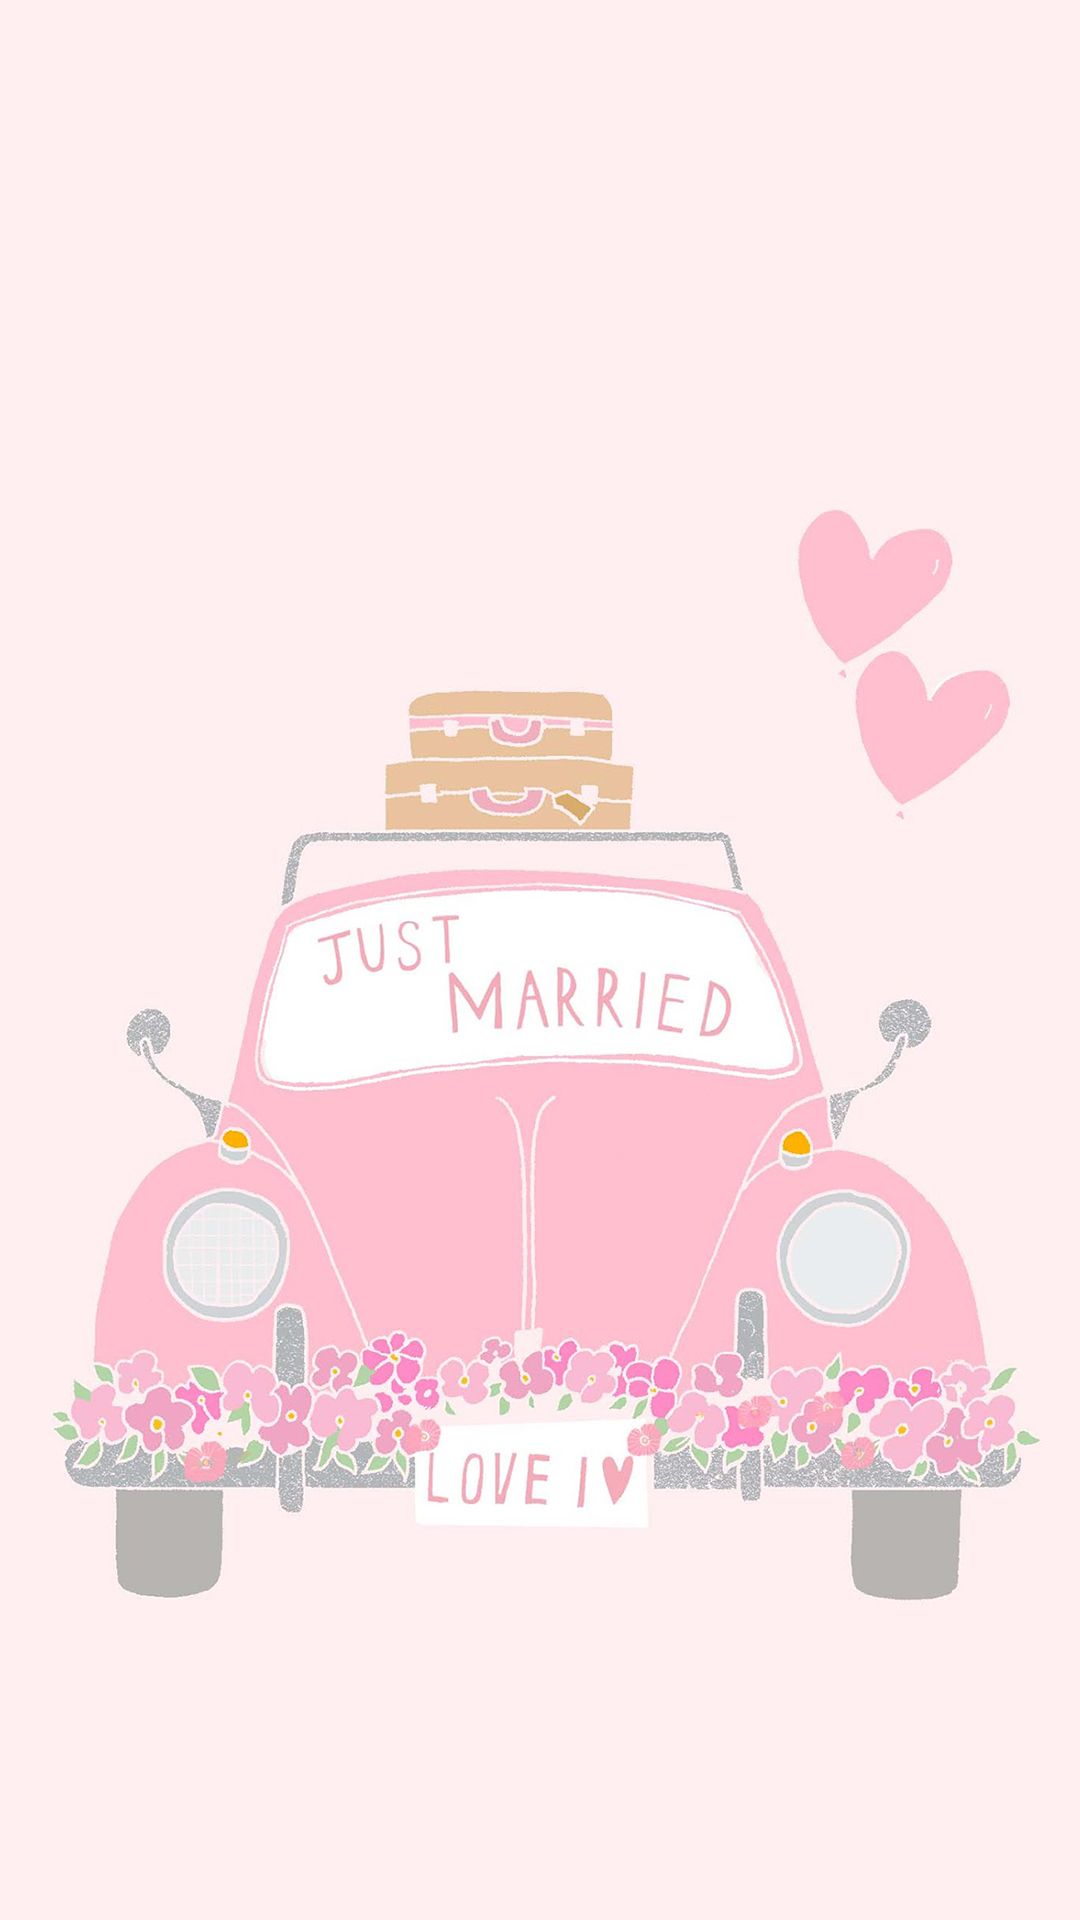 Downloaded From Wallpaper. App Id466993271. Thousands Of HD Wallpap. Just Married, Wedding Illustration, Wedding Anniversary Cards